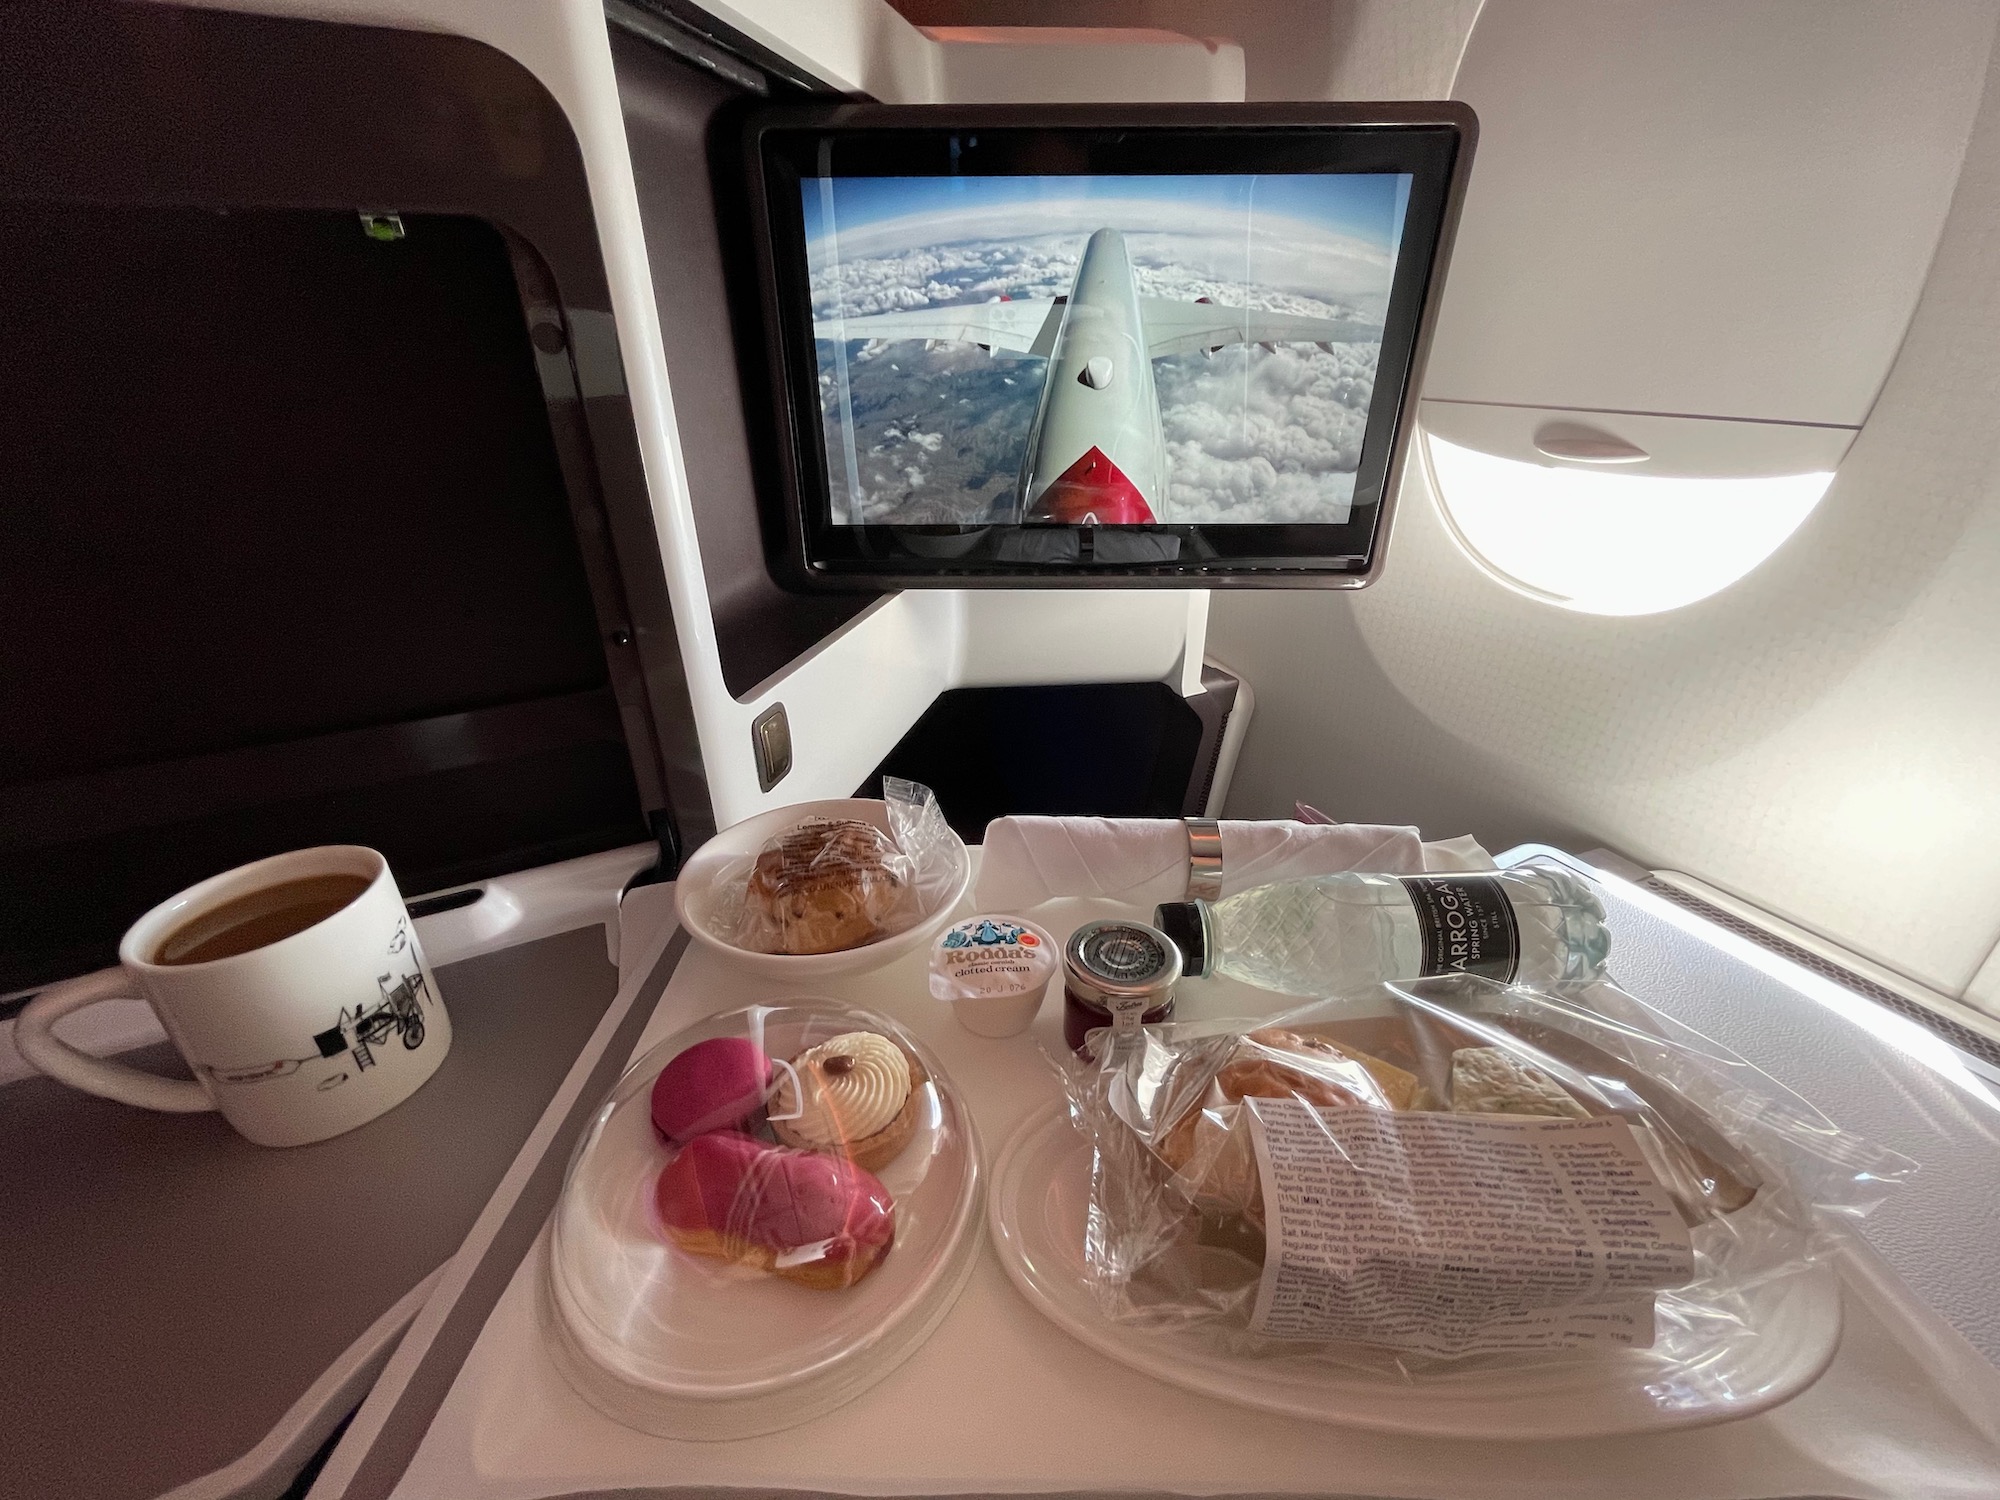 food on a tray in an airplane